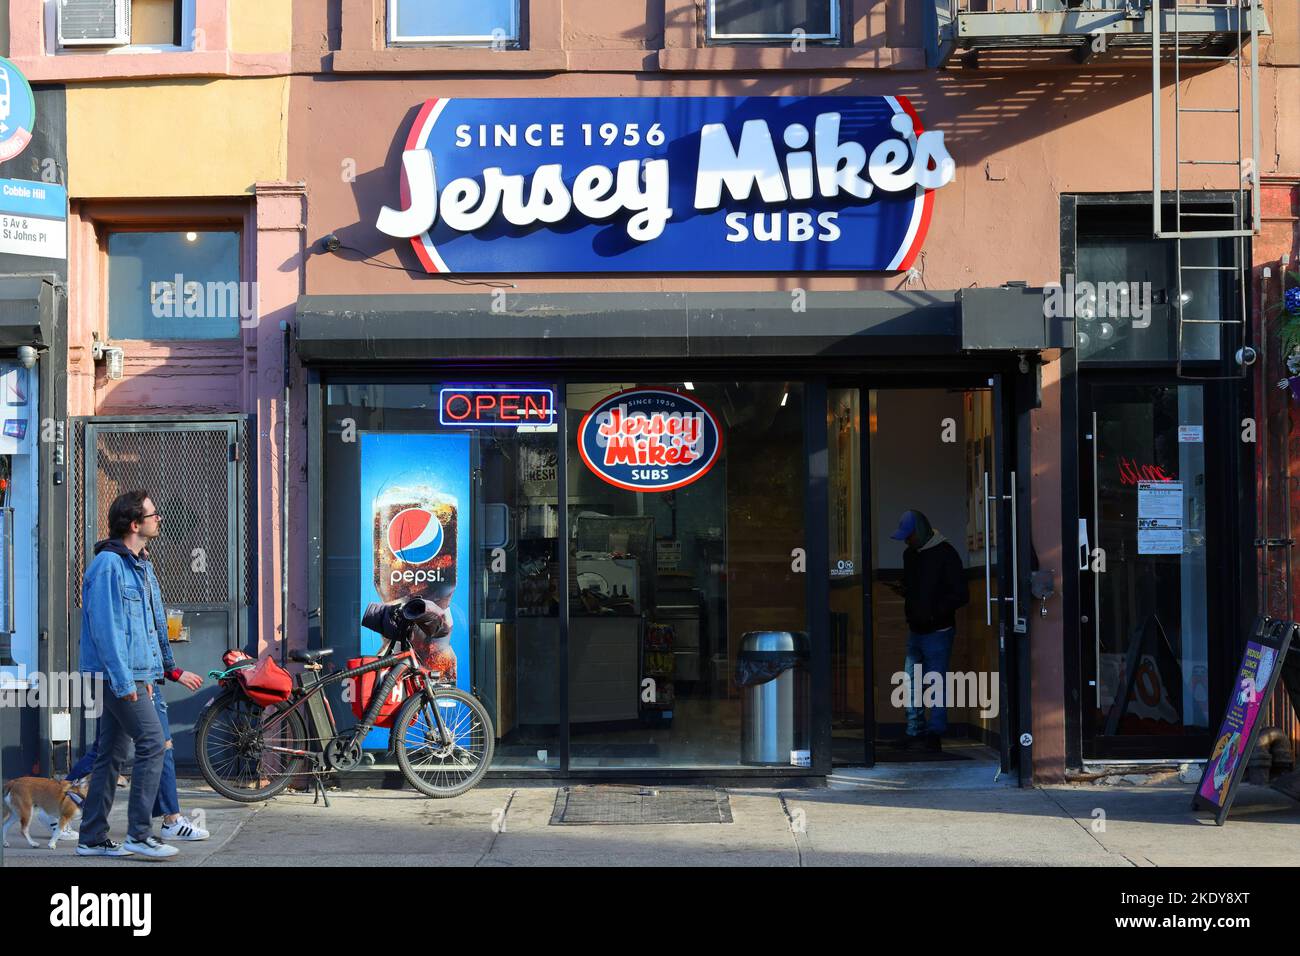 Jersey Mike's Subs, 131 5. Ave, Brooklyn, New York, NYC Schaufensterfoto eines U-Boot-Sandwich-Shops in Park Slope Stockfoto